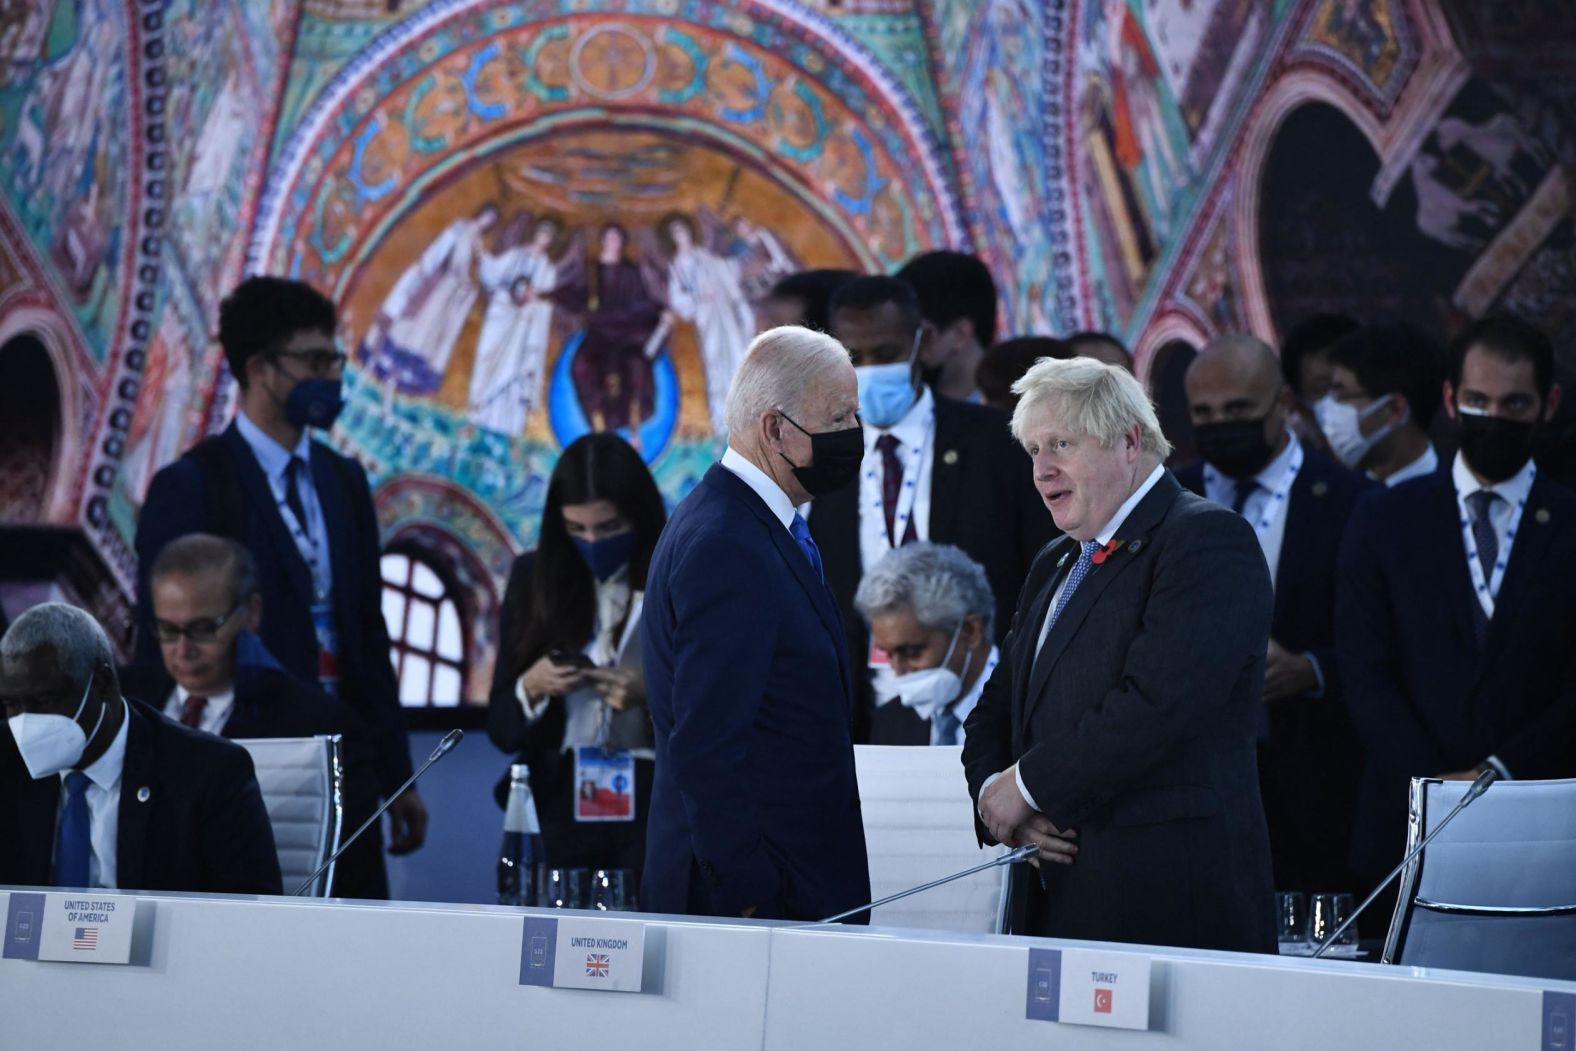 Biden and Johnson talk prior to the opening session of the G20 summit.